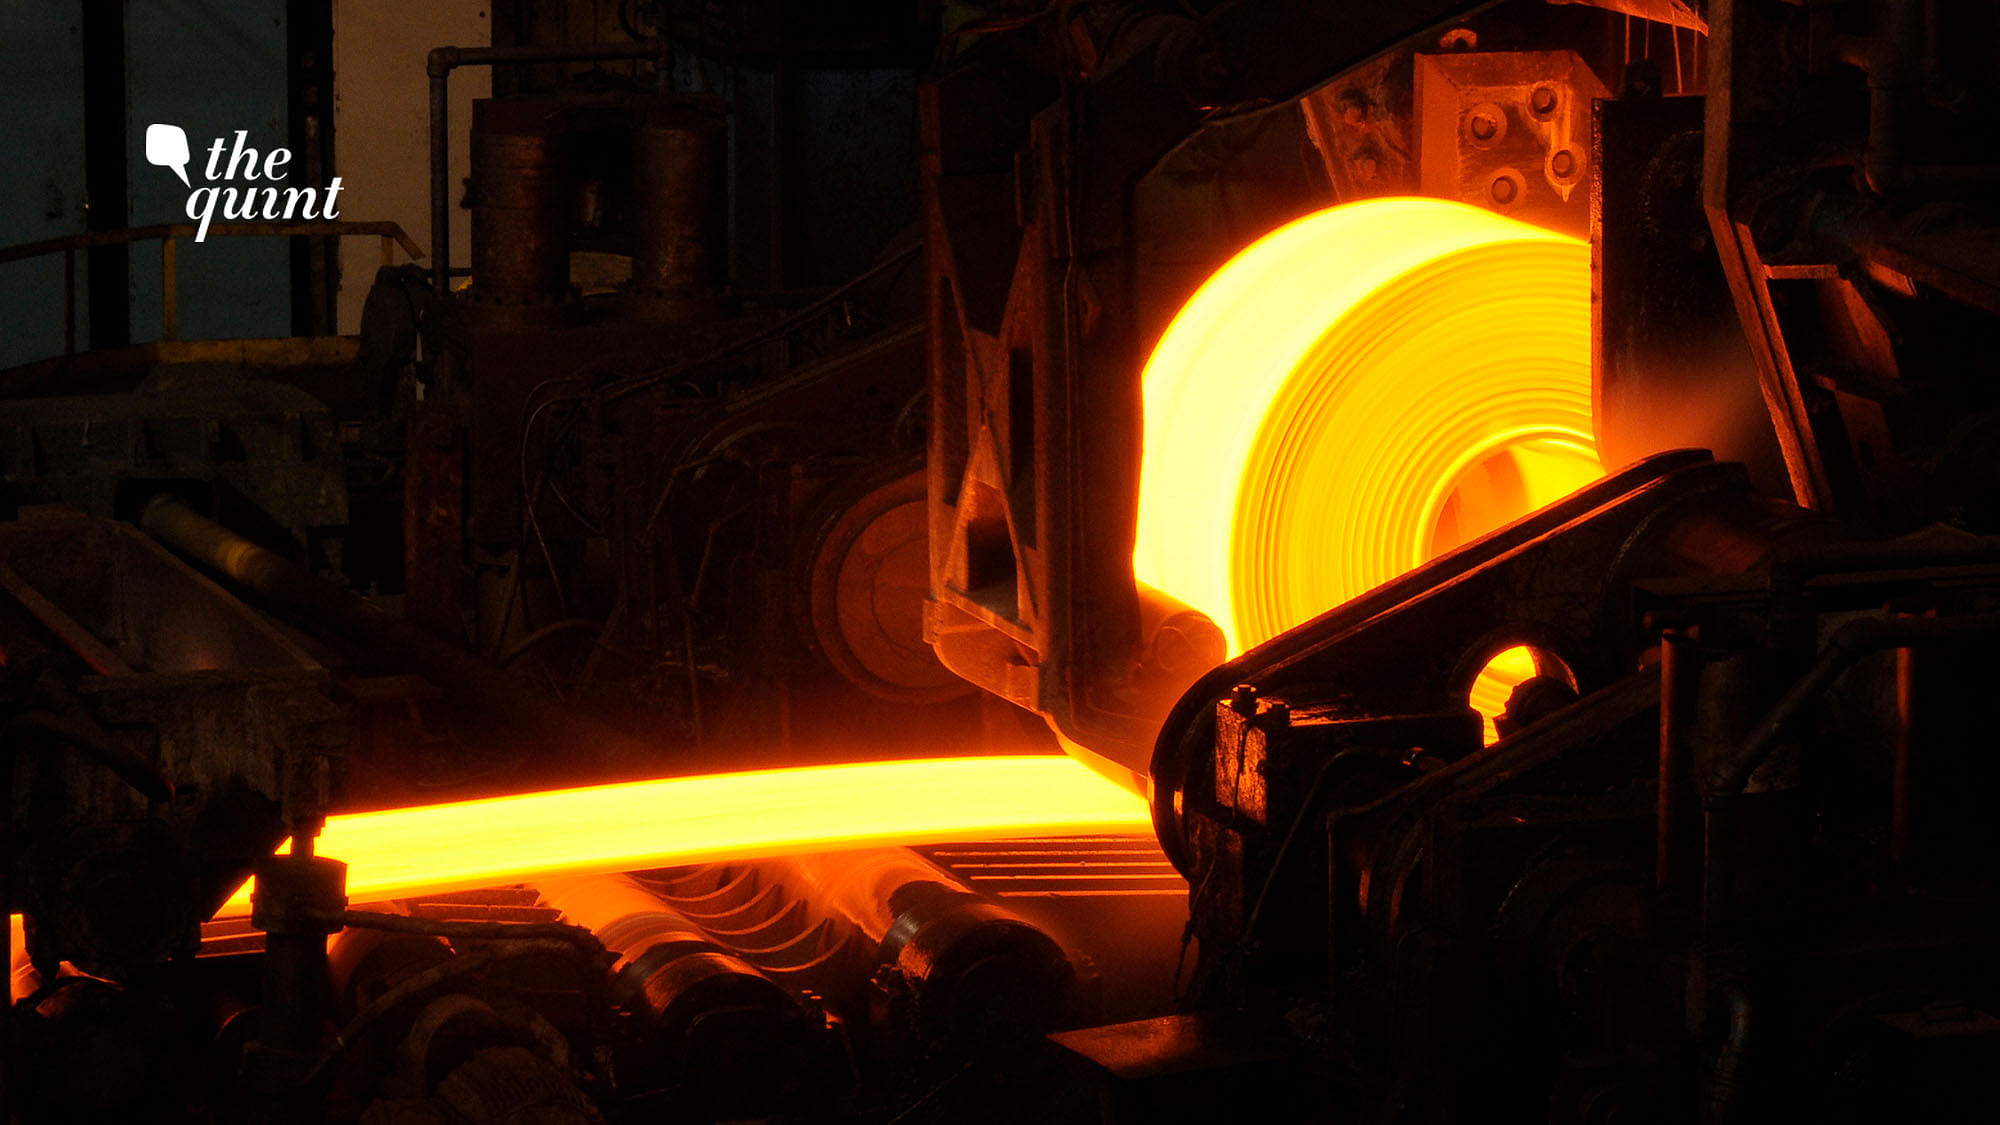 Manufacturing process at a factory. Image used for representational purposes.